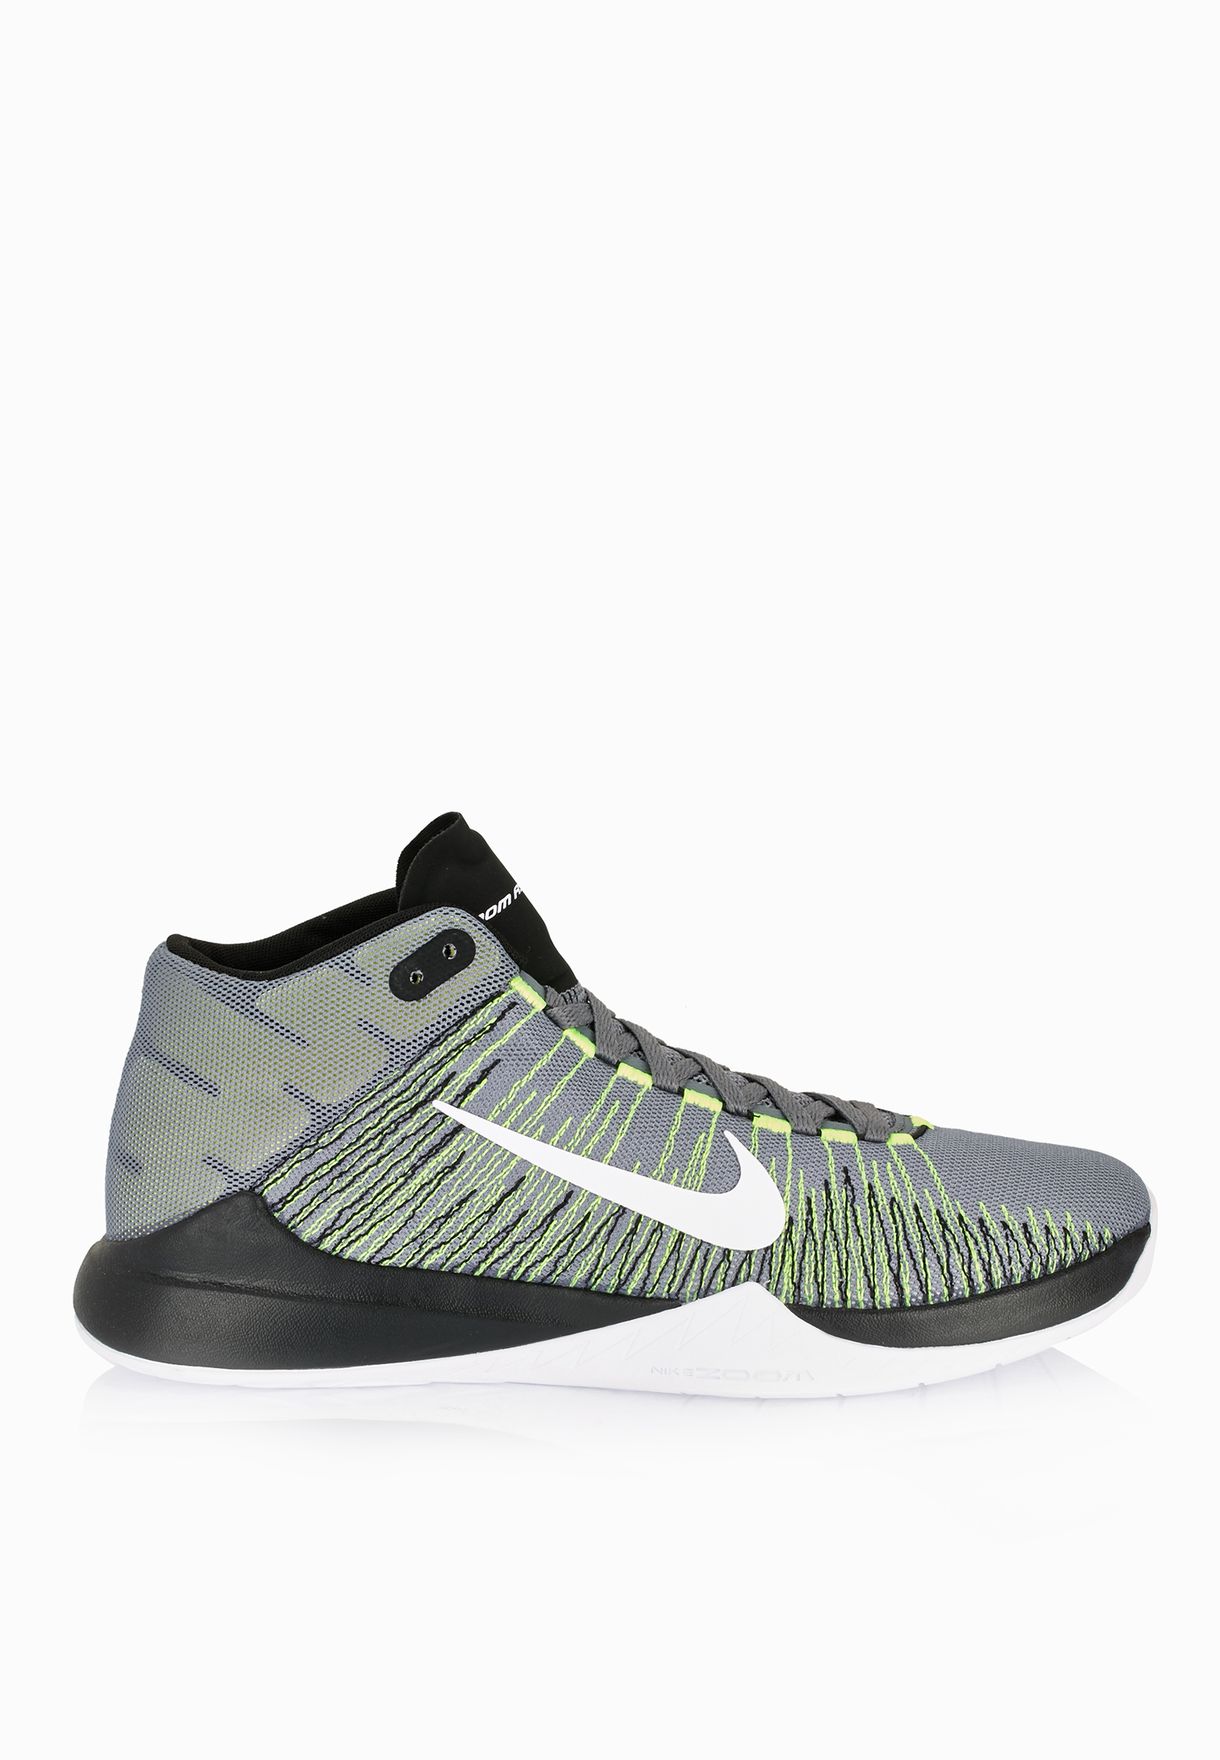 nike zoom ascention grey